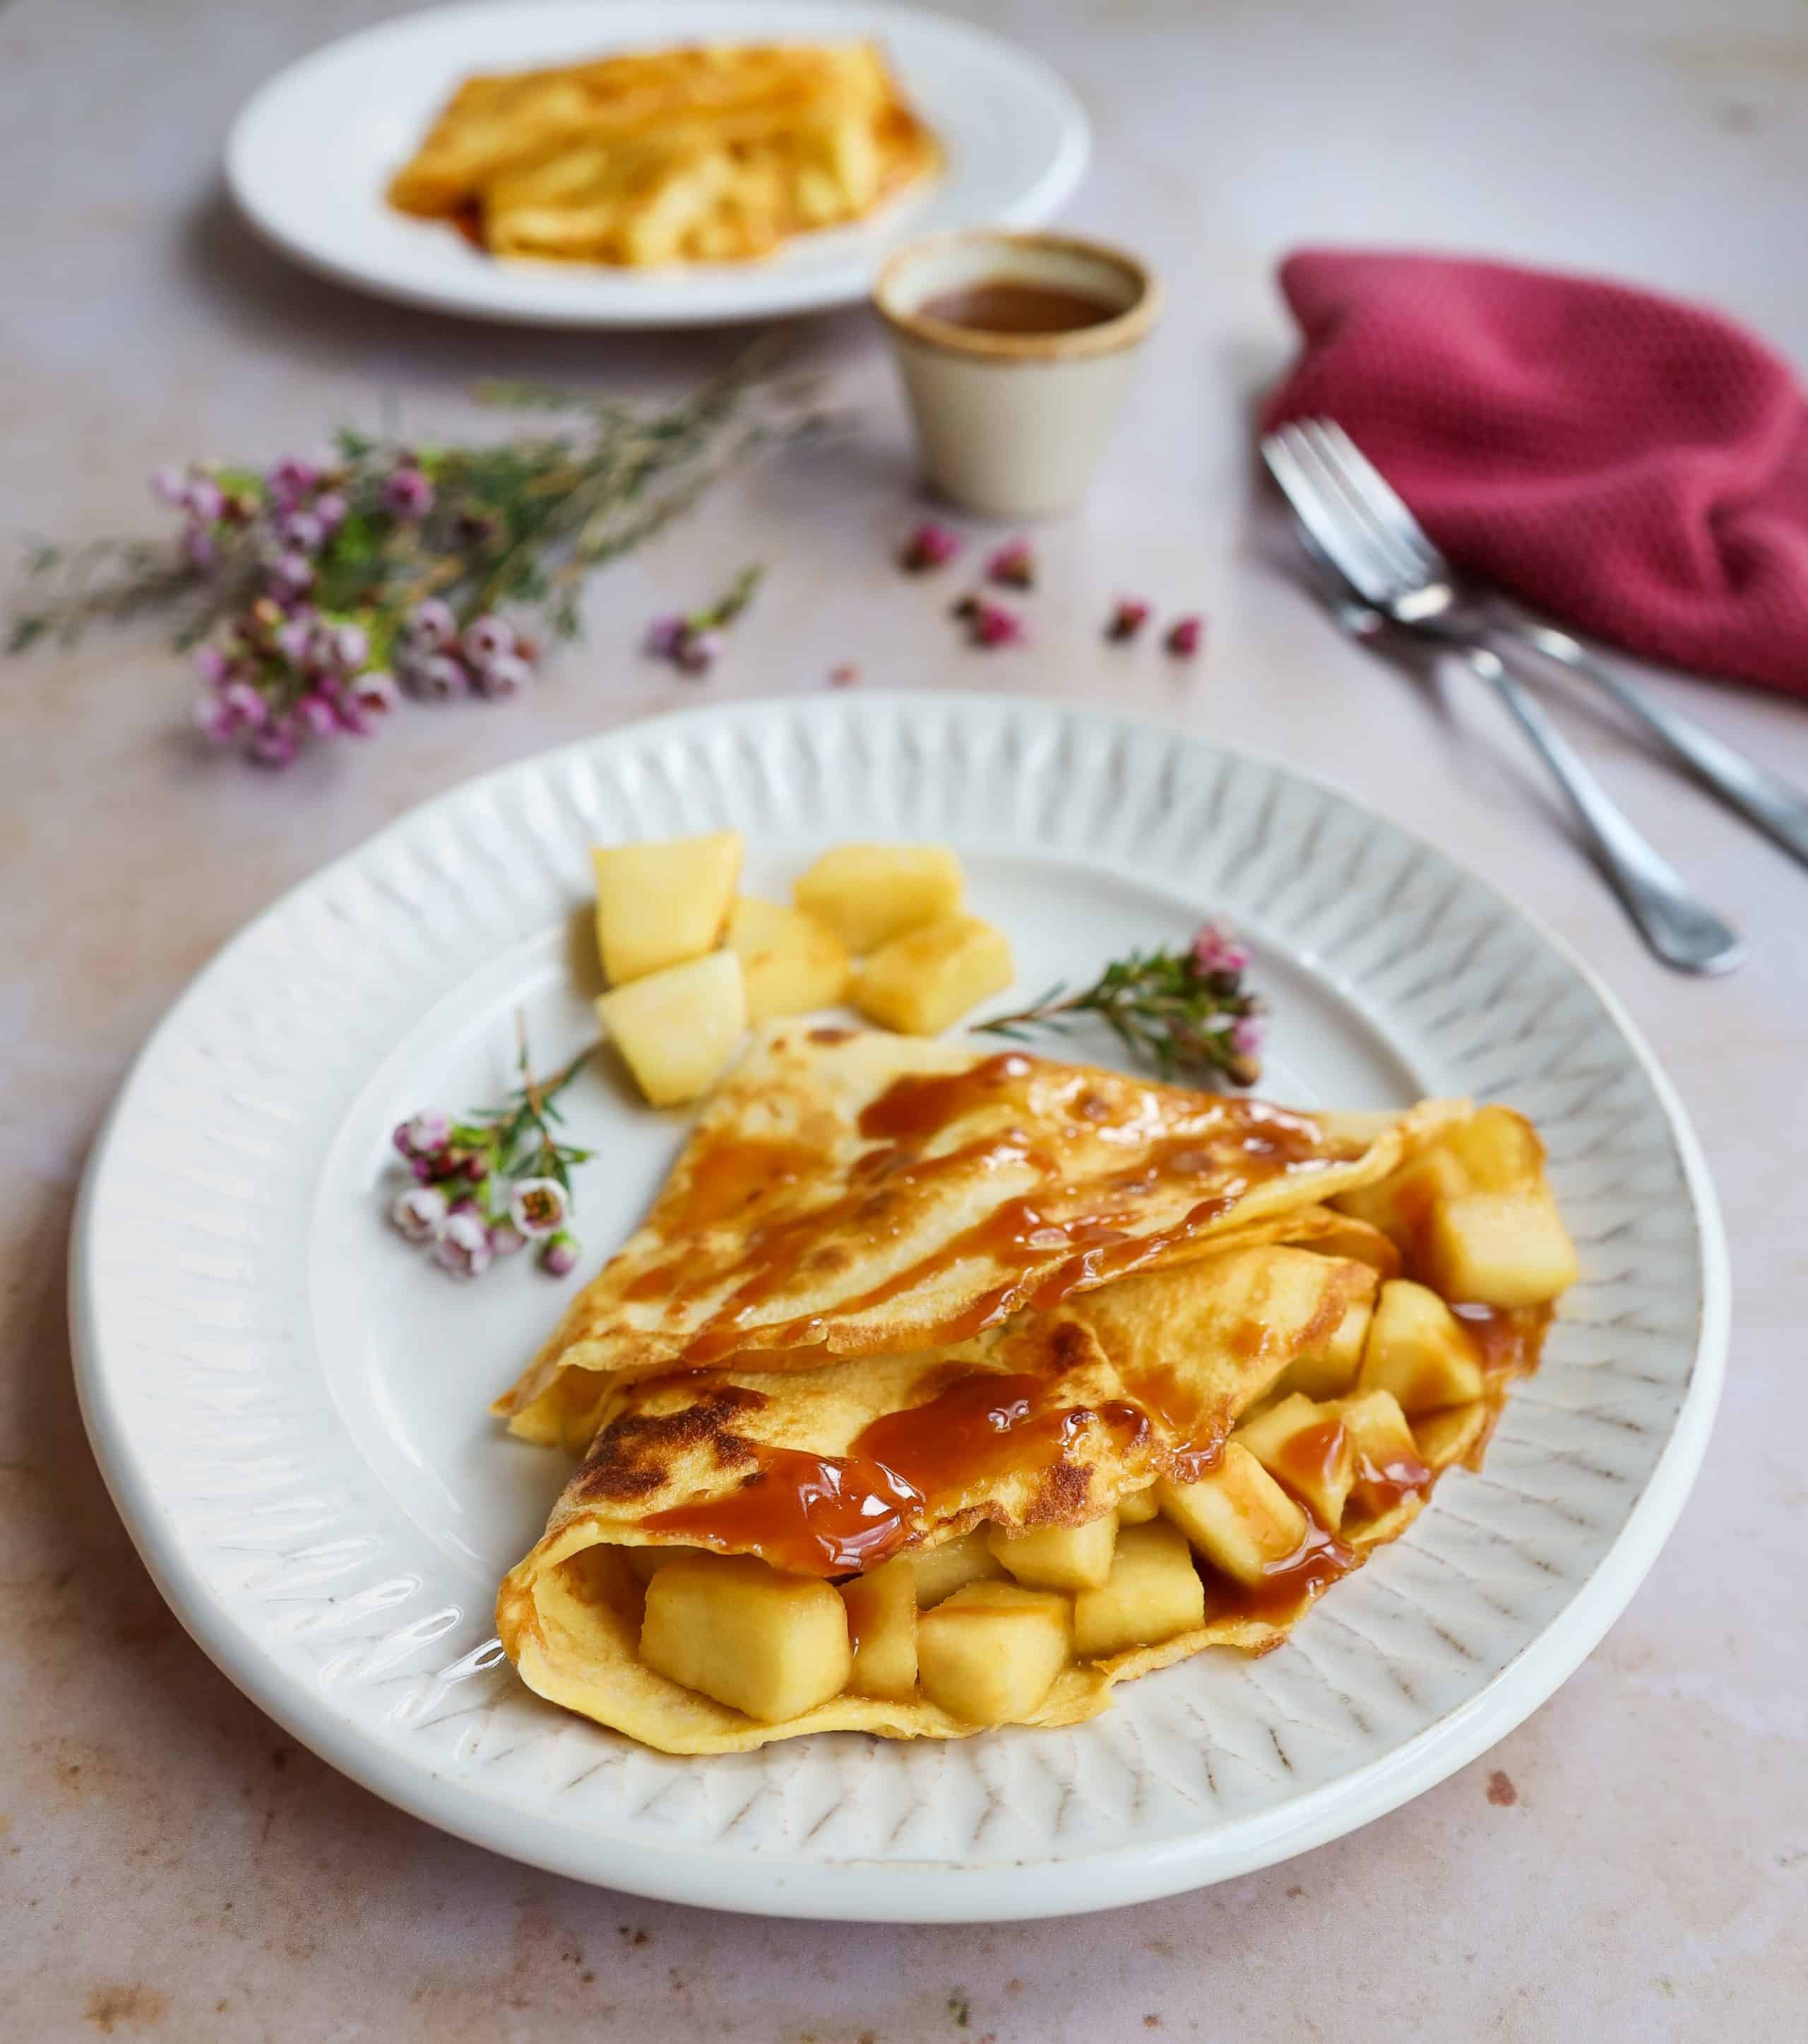 Crêpes with apples and toffee